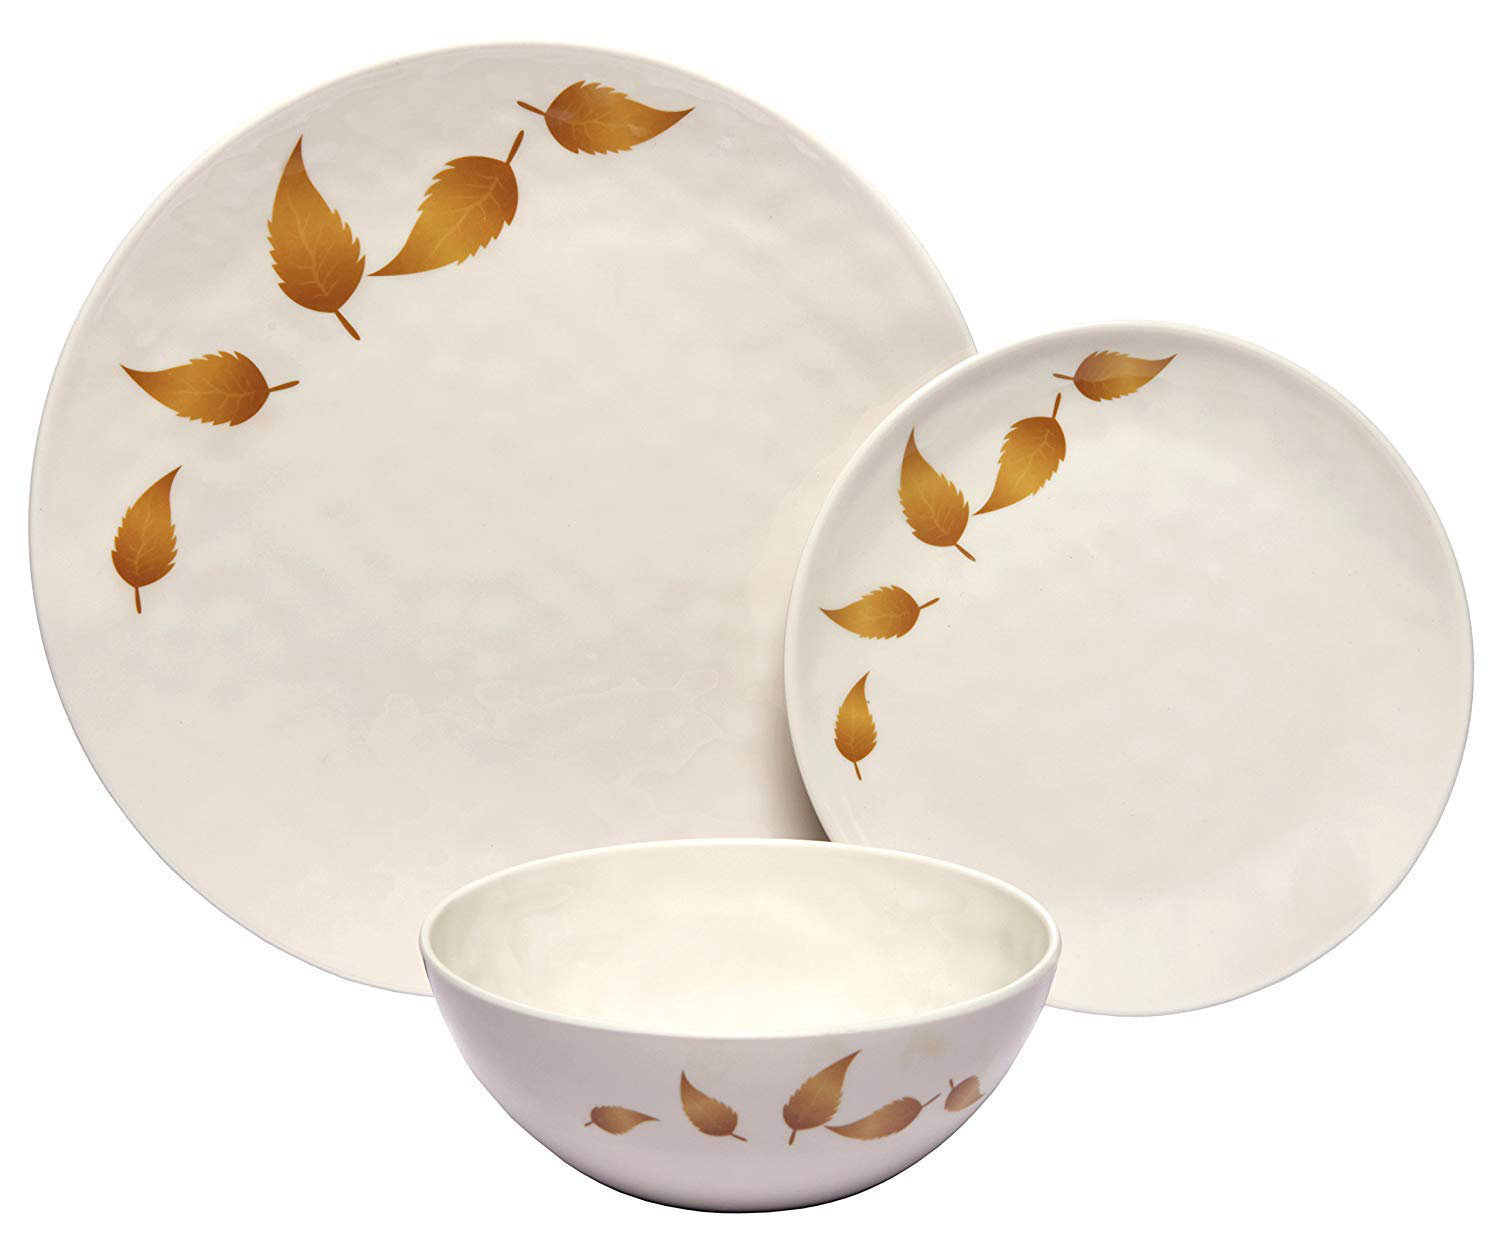 Shatter-Proof and Chip-Resistant Melamine Dinner Plates Ruby Compass Melamine 612409792037 Gold Leaves Collection Melange 6-Piece 100% Melamine Dinner Plate Set 